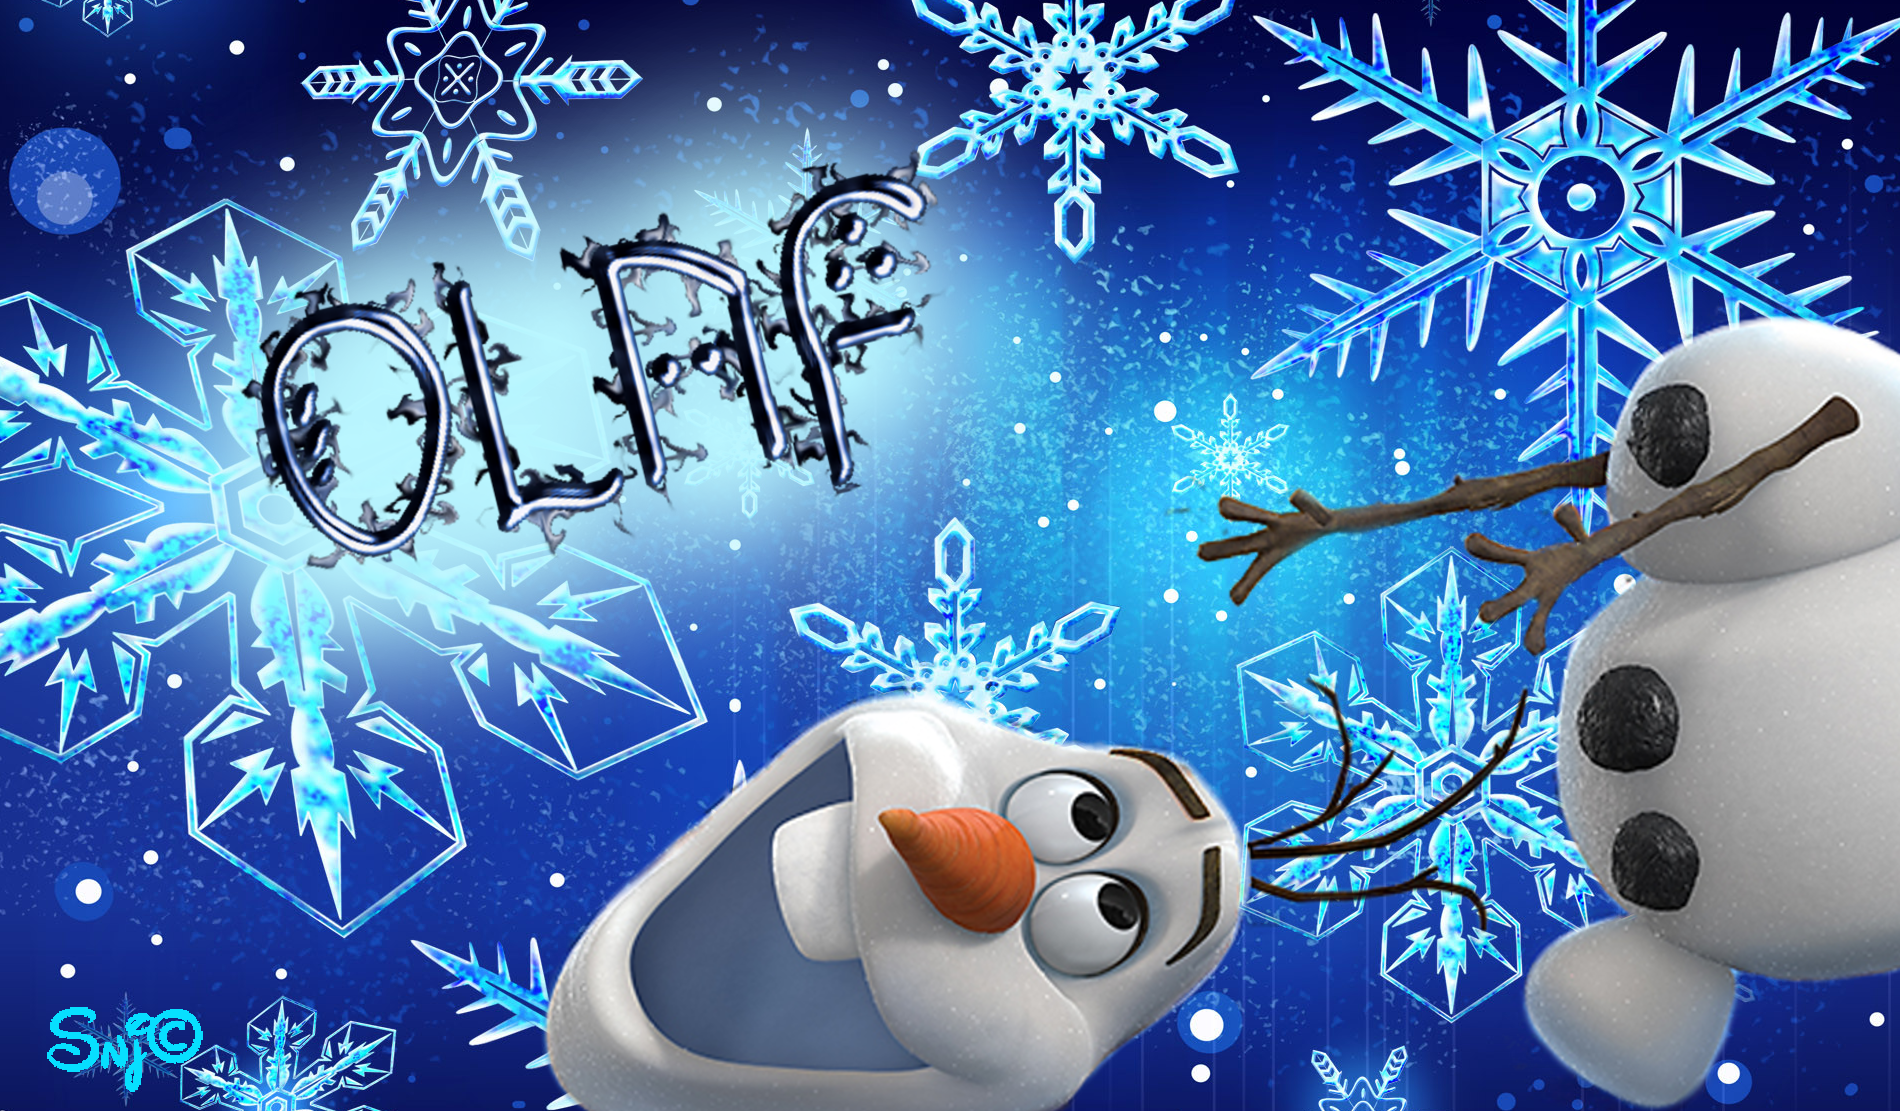 Olaf Attack Wallpaper By Snappette Smurfette